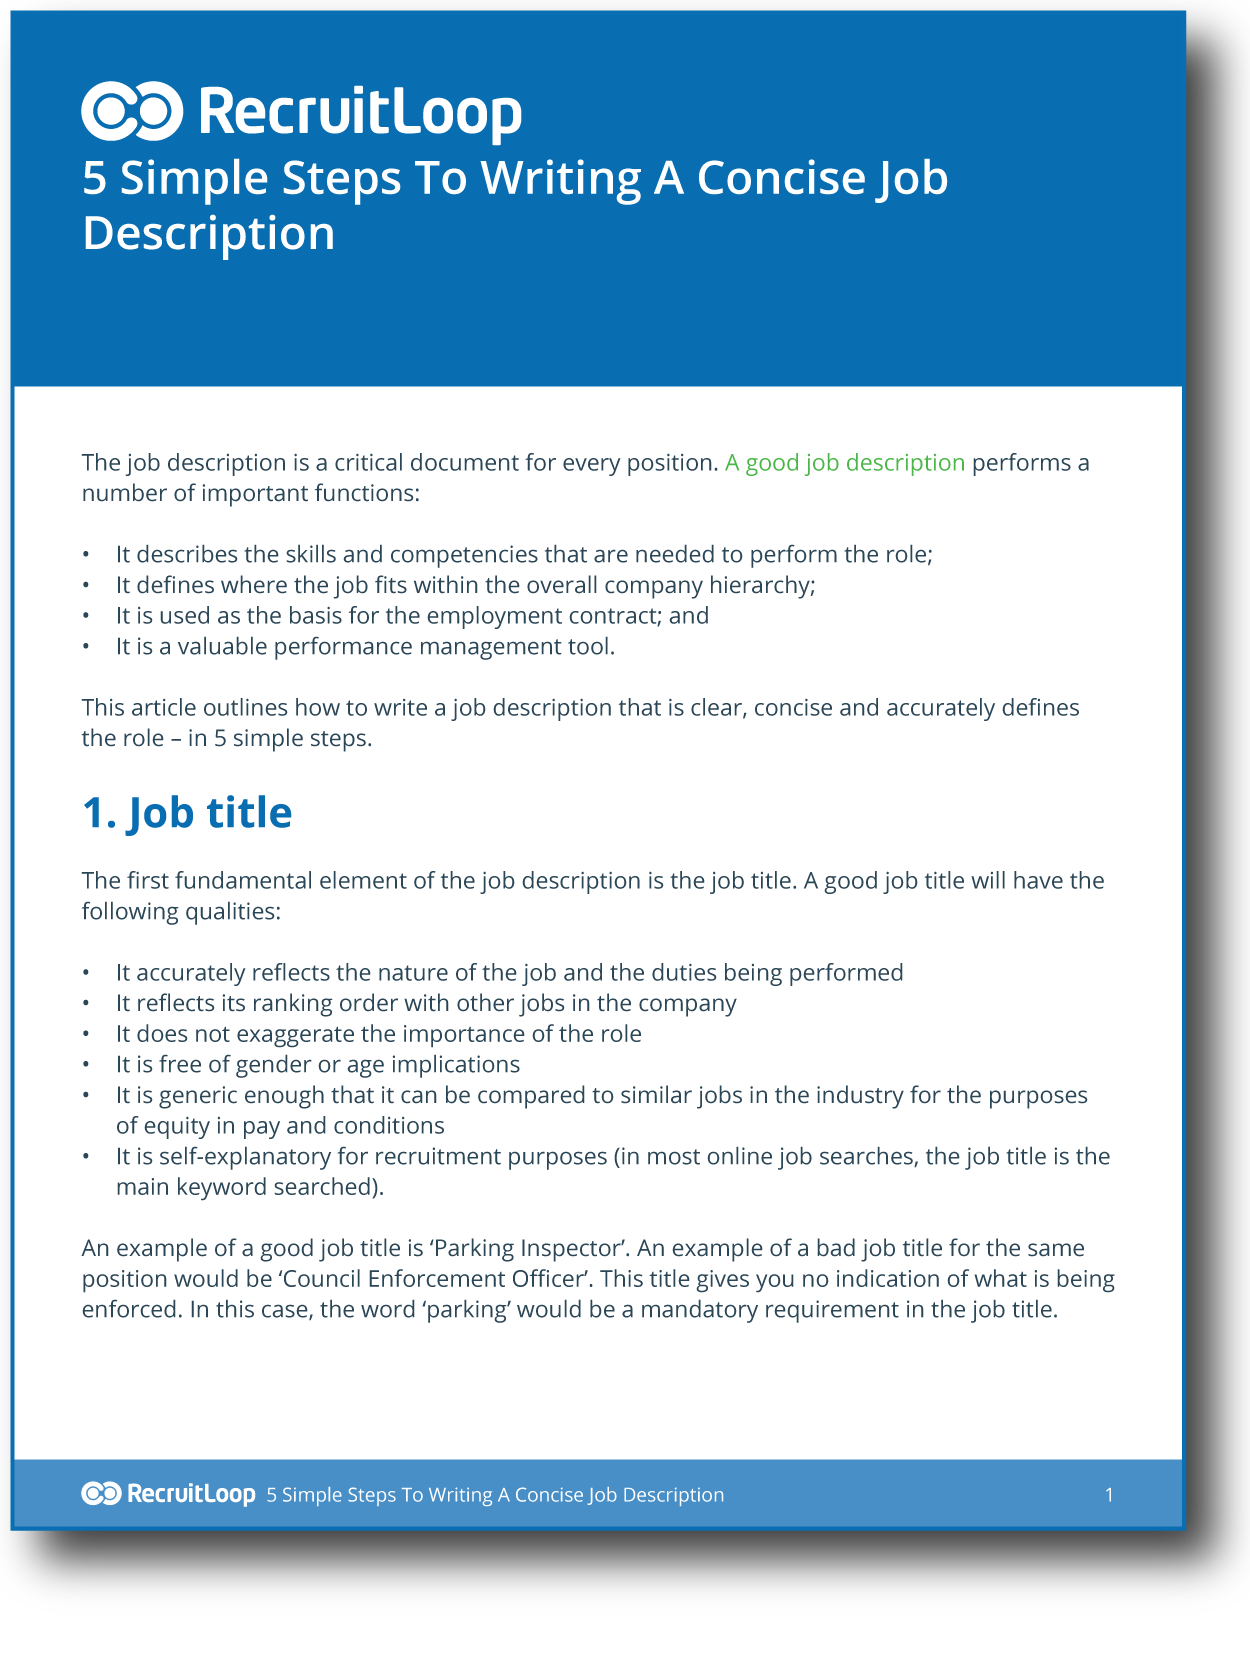 How to write a job specification